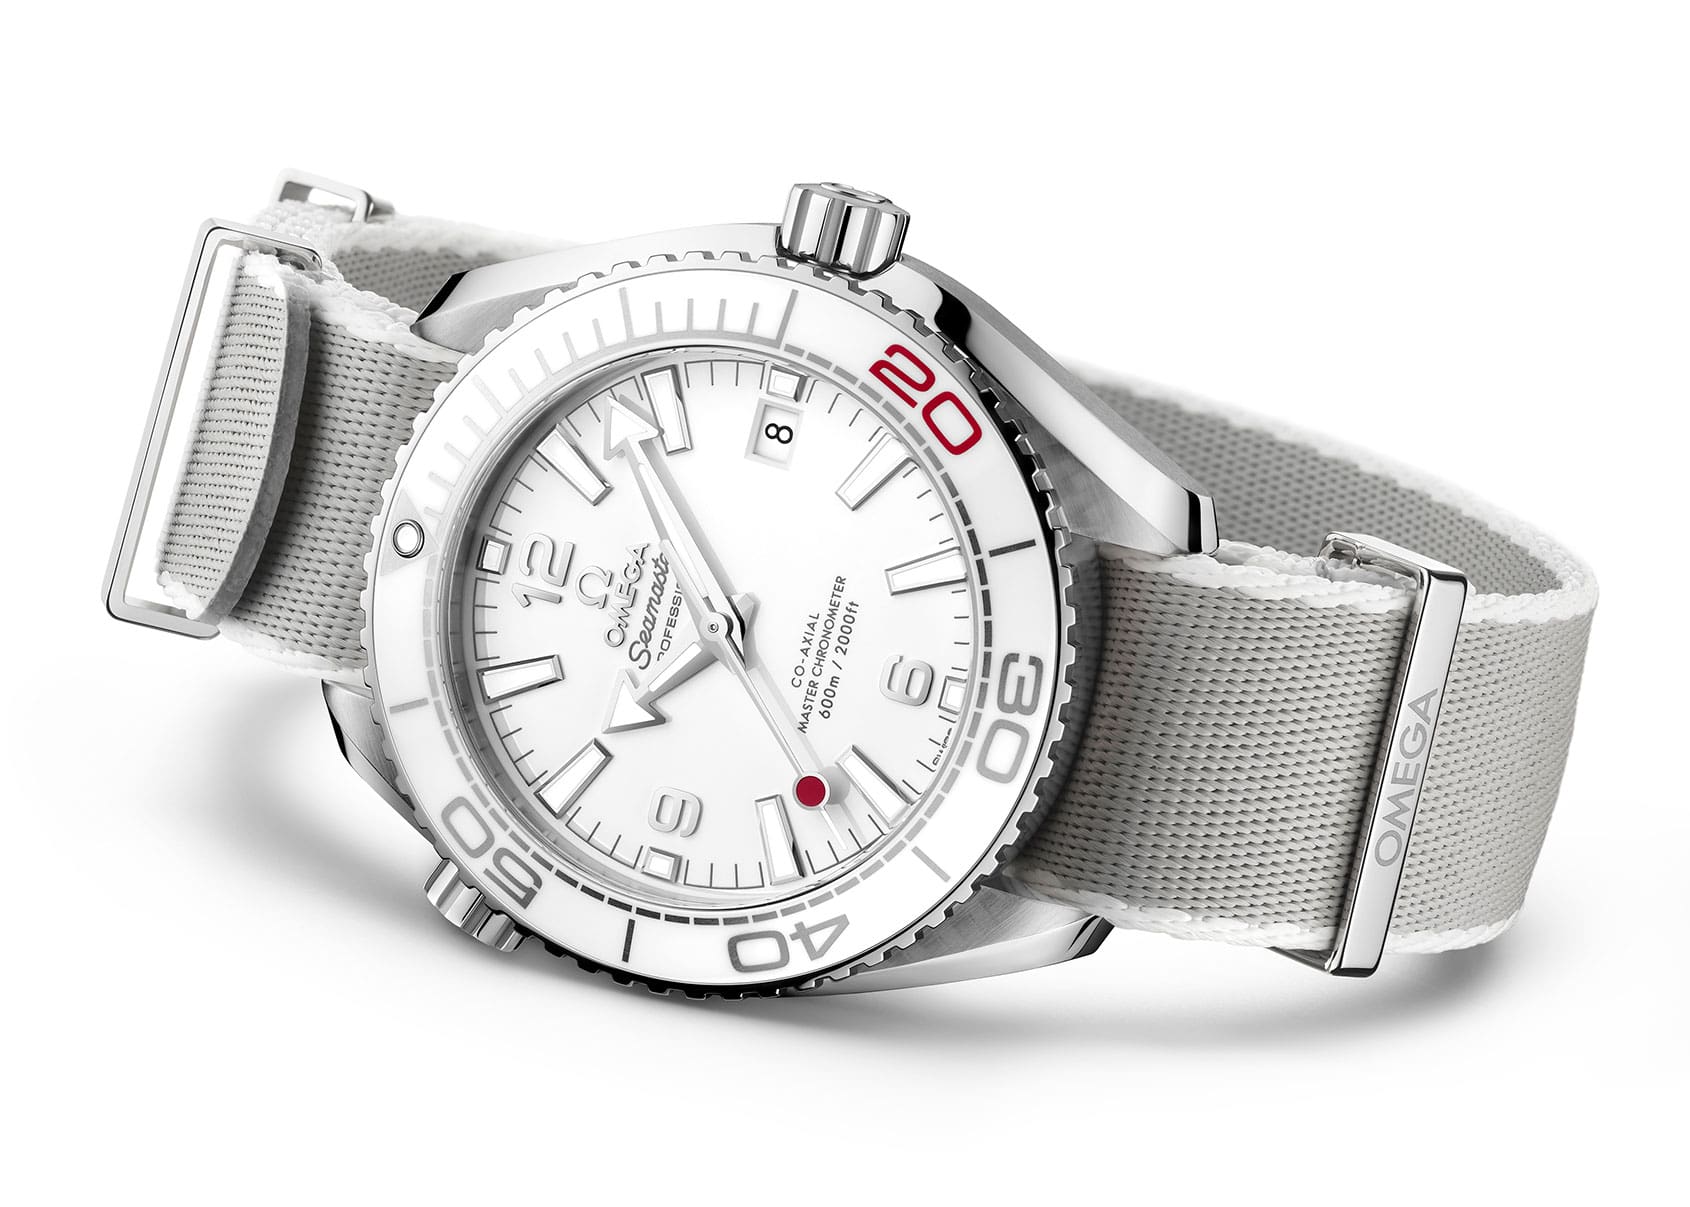 INTRODUCING: The Omega Seamaster Planet Ocean Tokyo 2020 Limited Edition